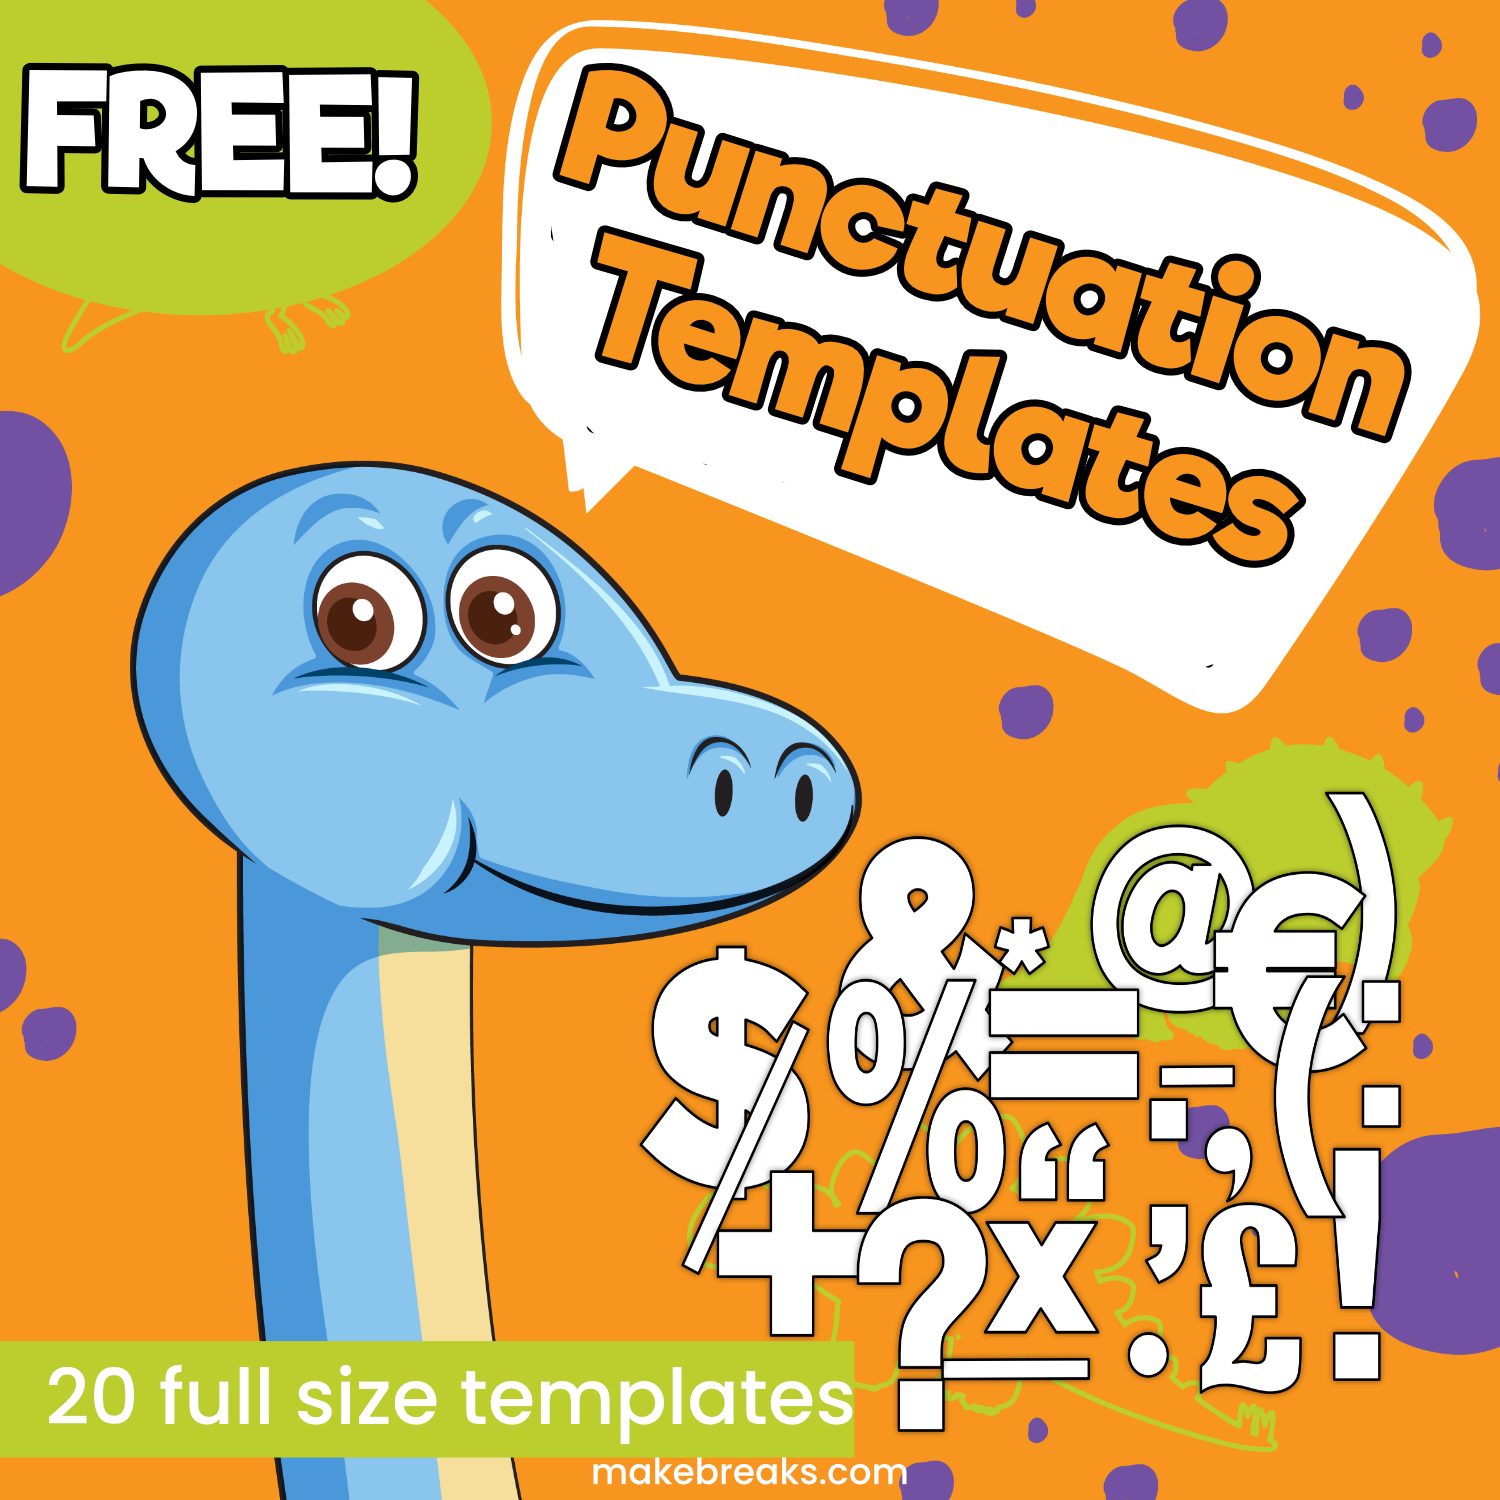 Free Printable Punctuation Templates